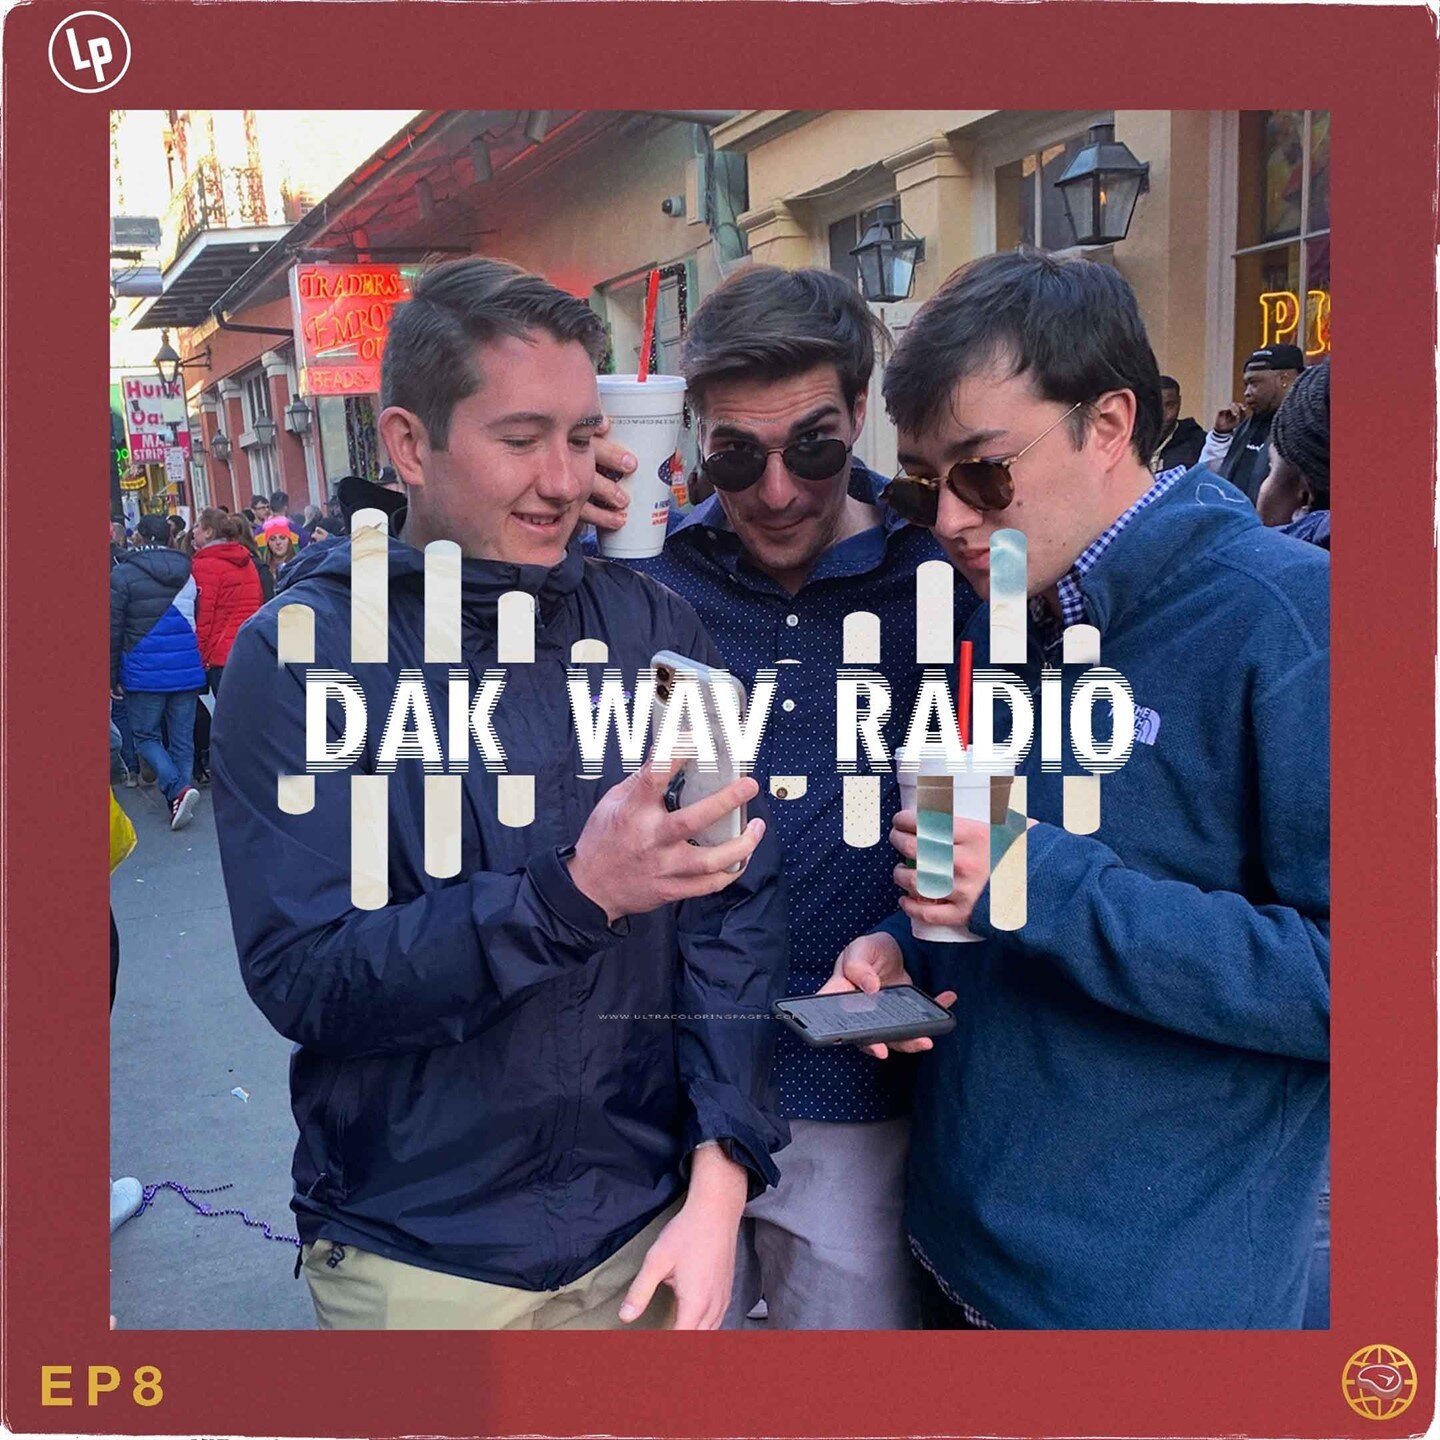 Dak Wav Radio is updated just in time for the weekend- enjoy bumping this 🔥 playlist! Link in bio ⁠
⁠